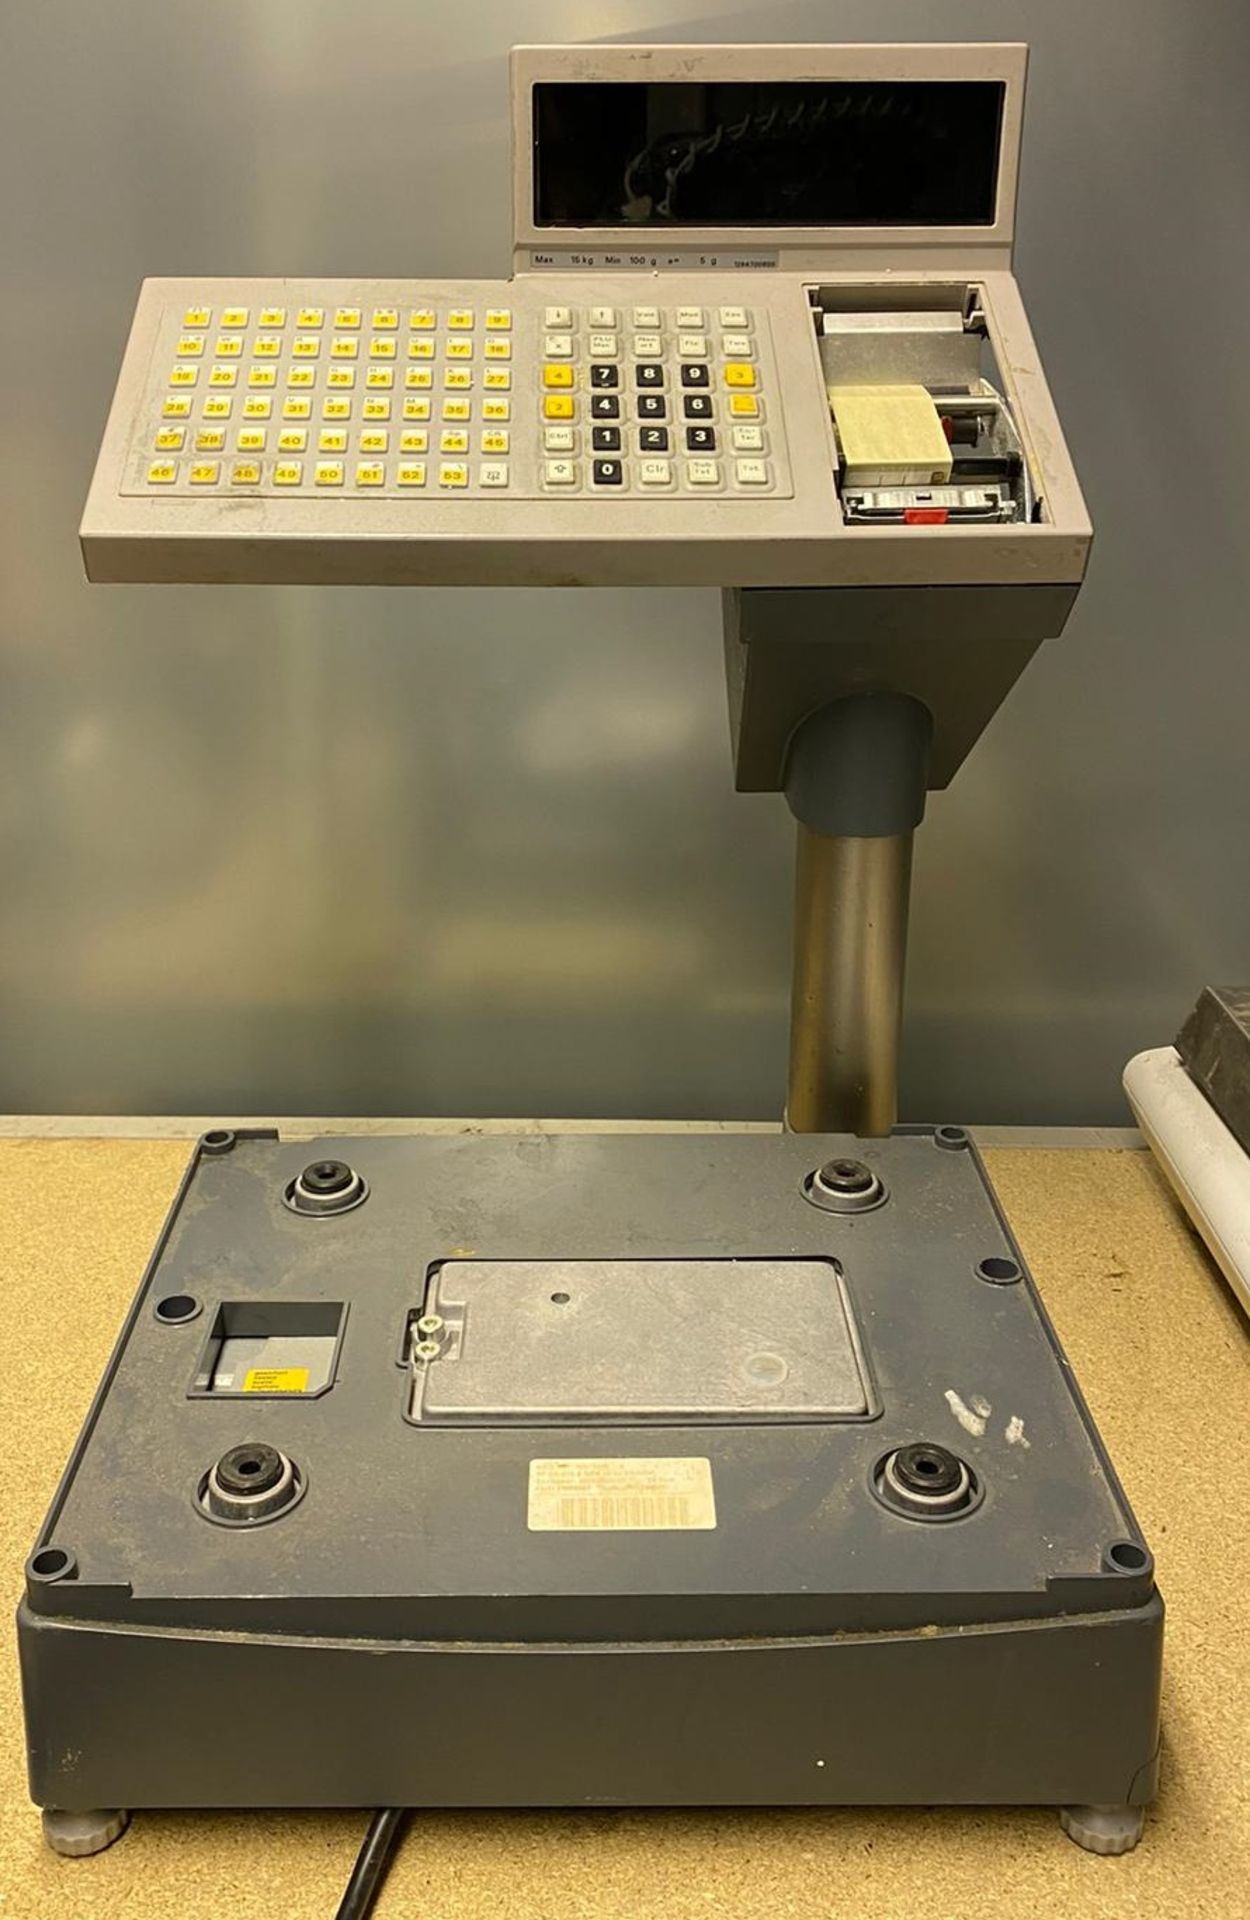 1 x Bizerba SC-H 800 Basic Retail Weighing Scale - Used Condition - Location: Altrincham WA14 - - Image 8 of 9